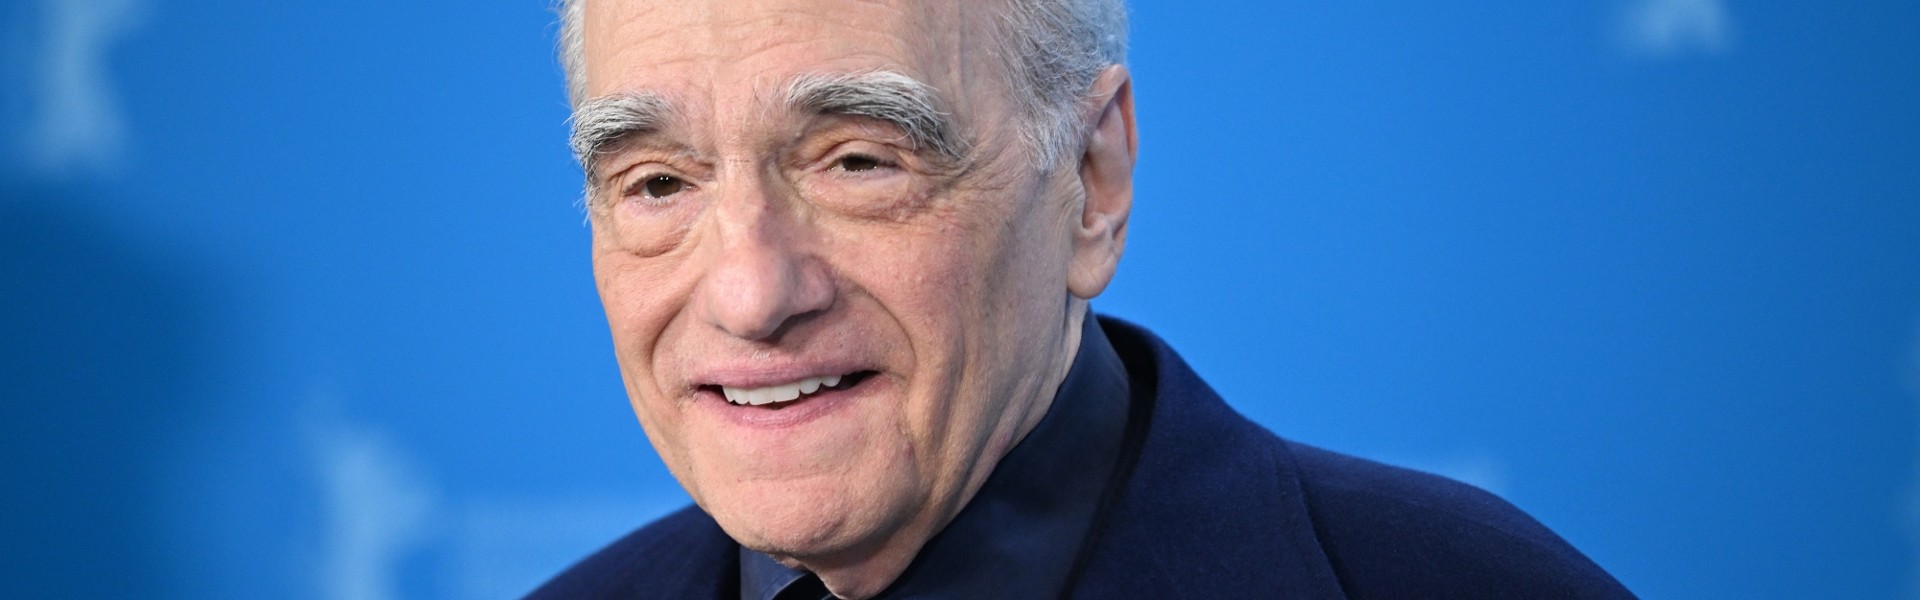 Will Martin Scorsese be canceled? Controversy over a new series